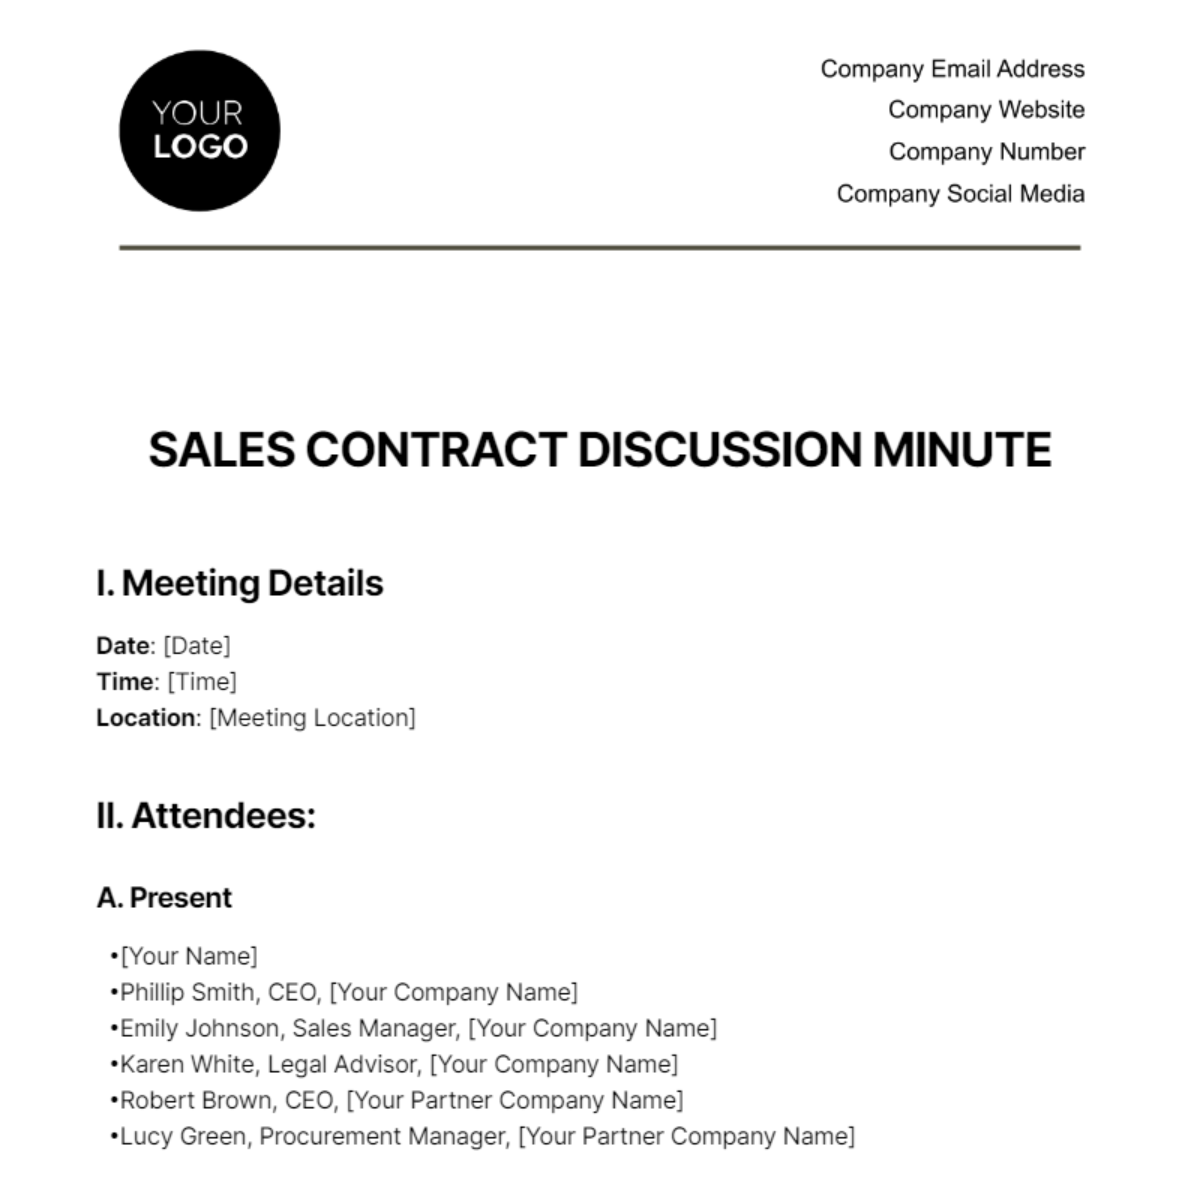 Free Sales Contract Discussion Minute Template